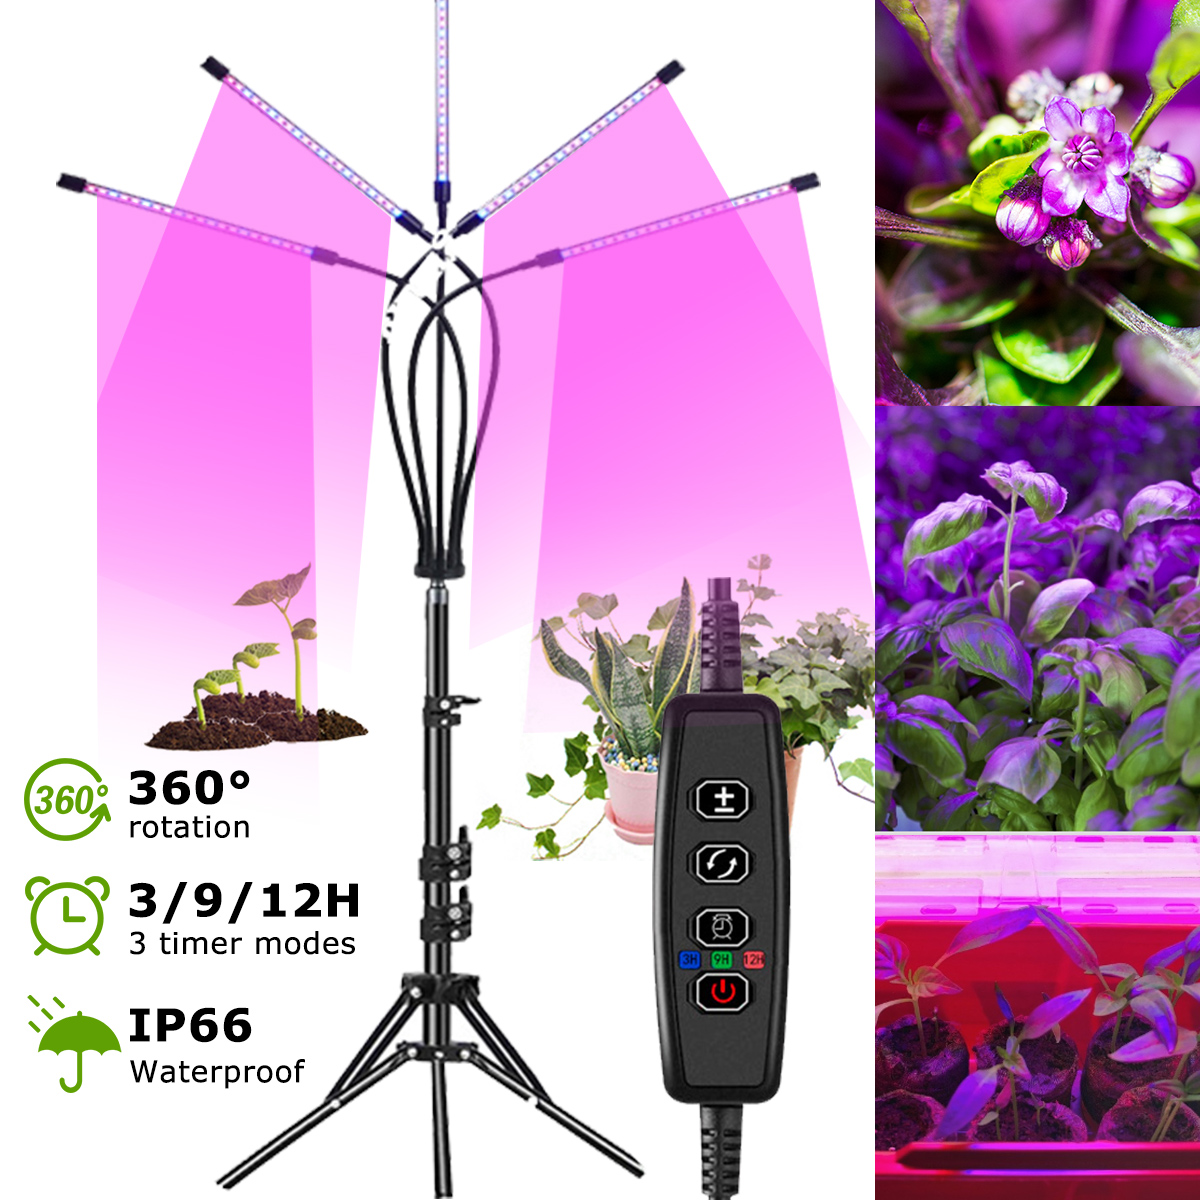 5-Hesds-LED-Grow-Light-Plant-Growing-Lamp-Lights-With-Tripod-For-Indoor-Plants-1836991-7